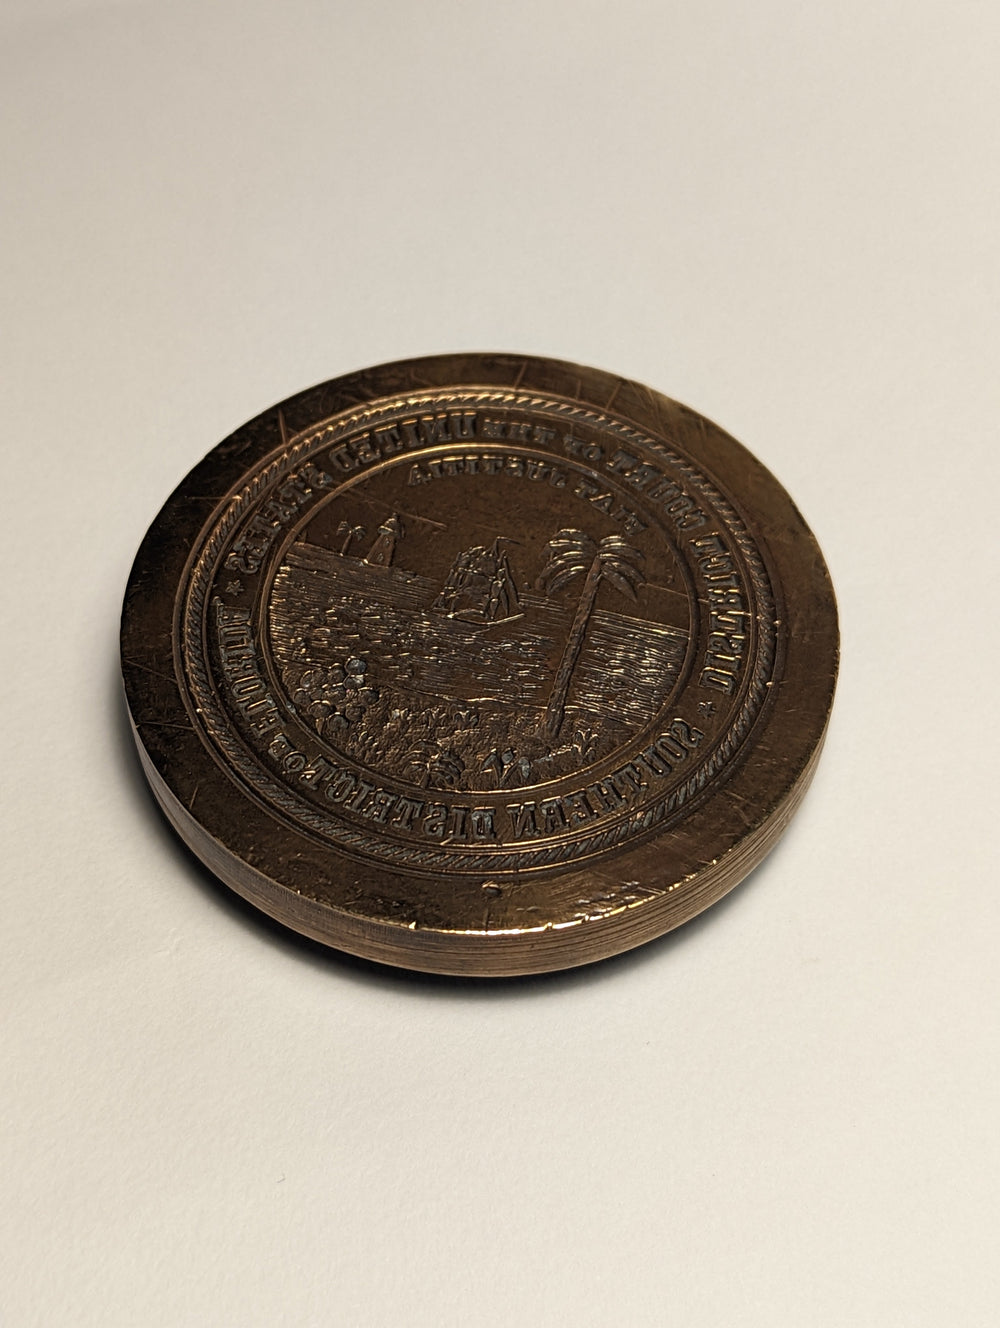 American Brass Desk Seal  - Southern District of Florida